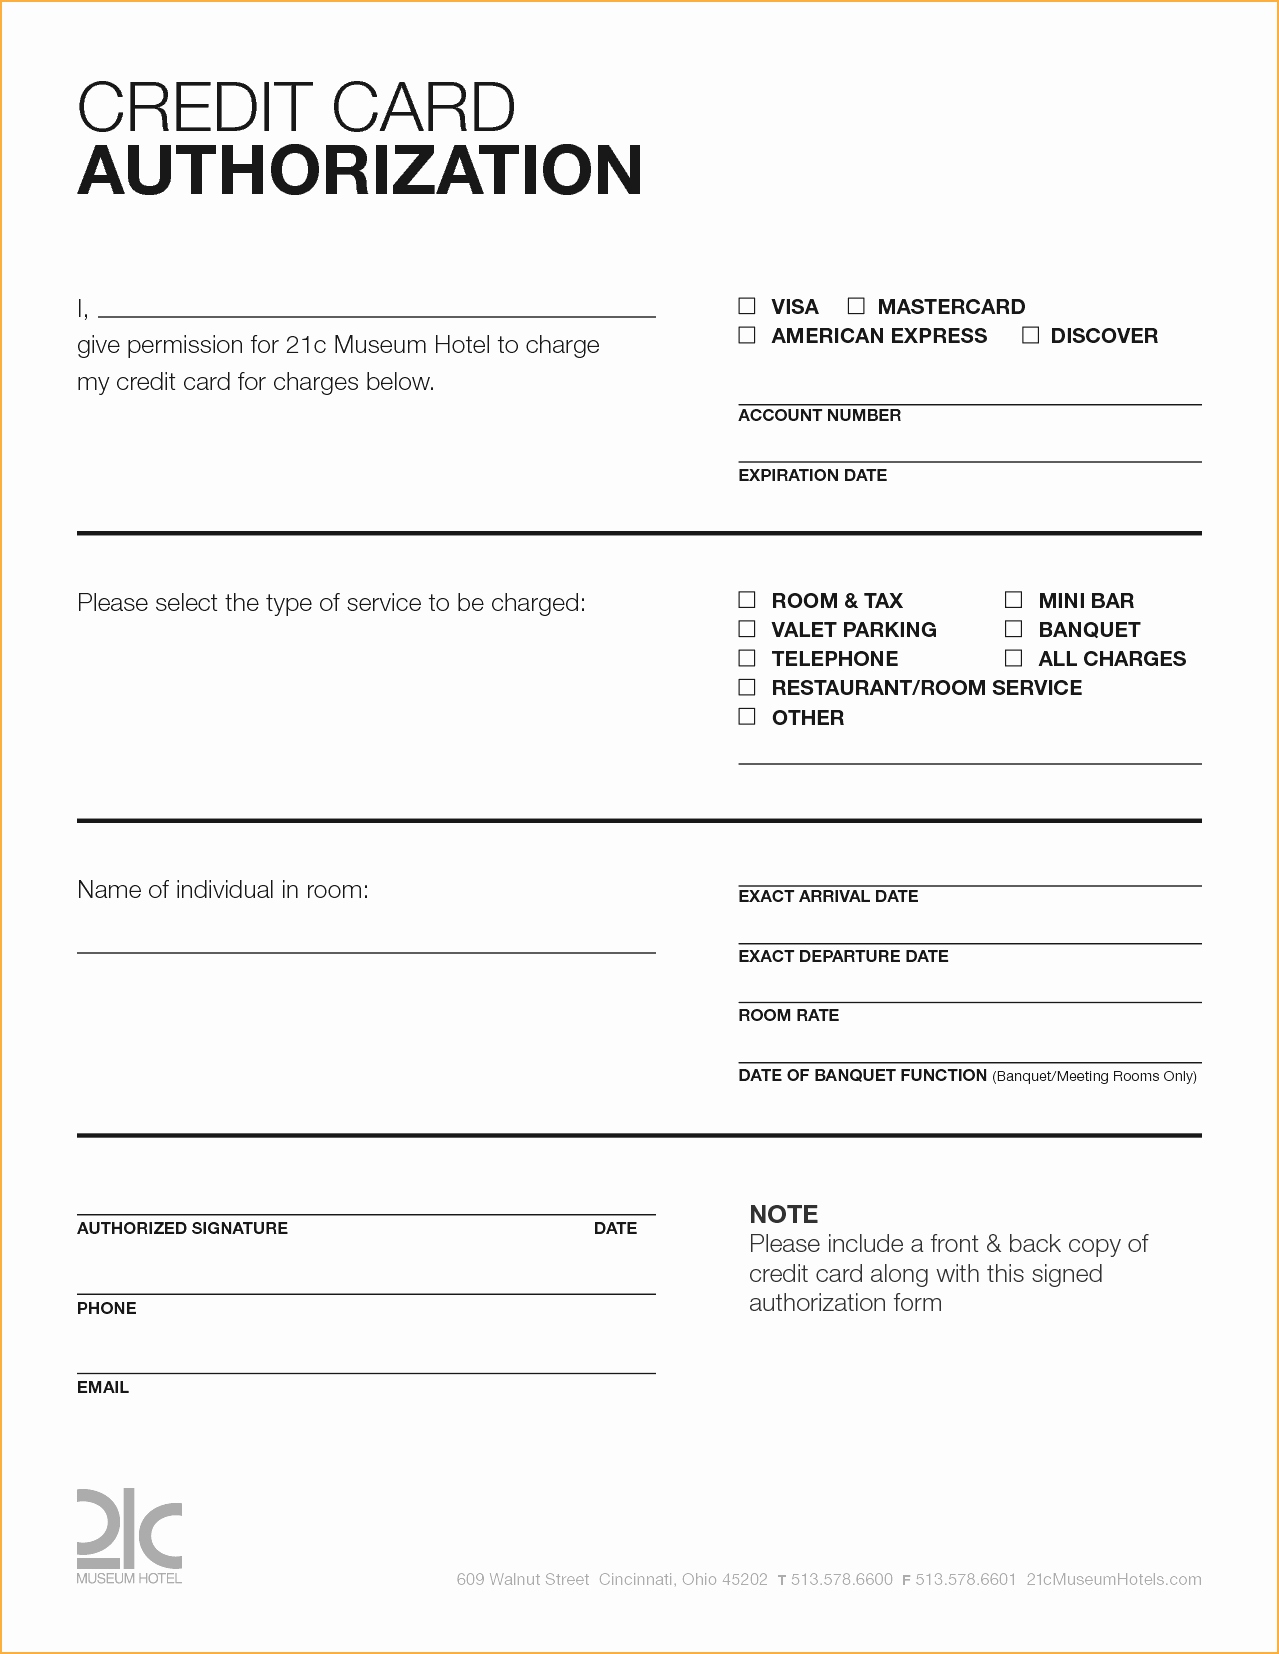 Credit Card Authorization Form Template Free Download 1891